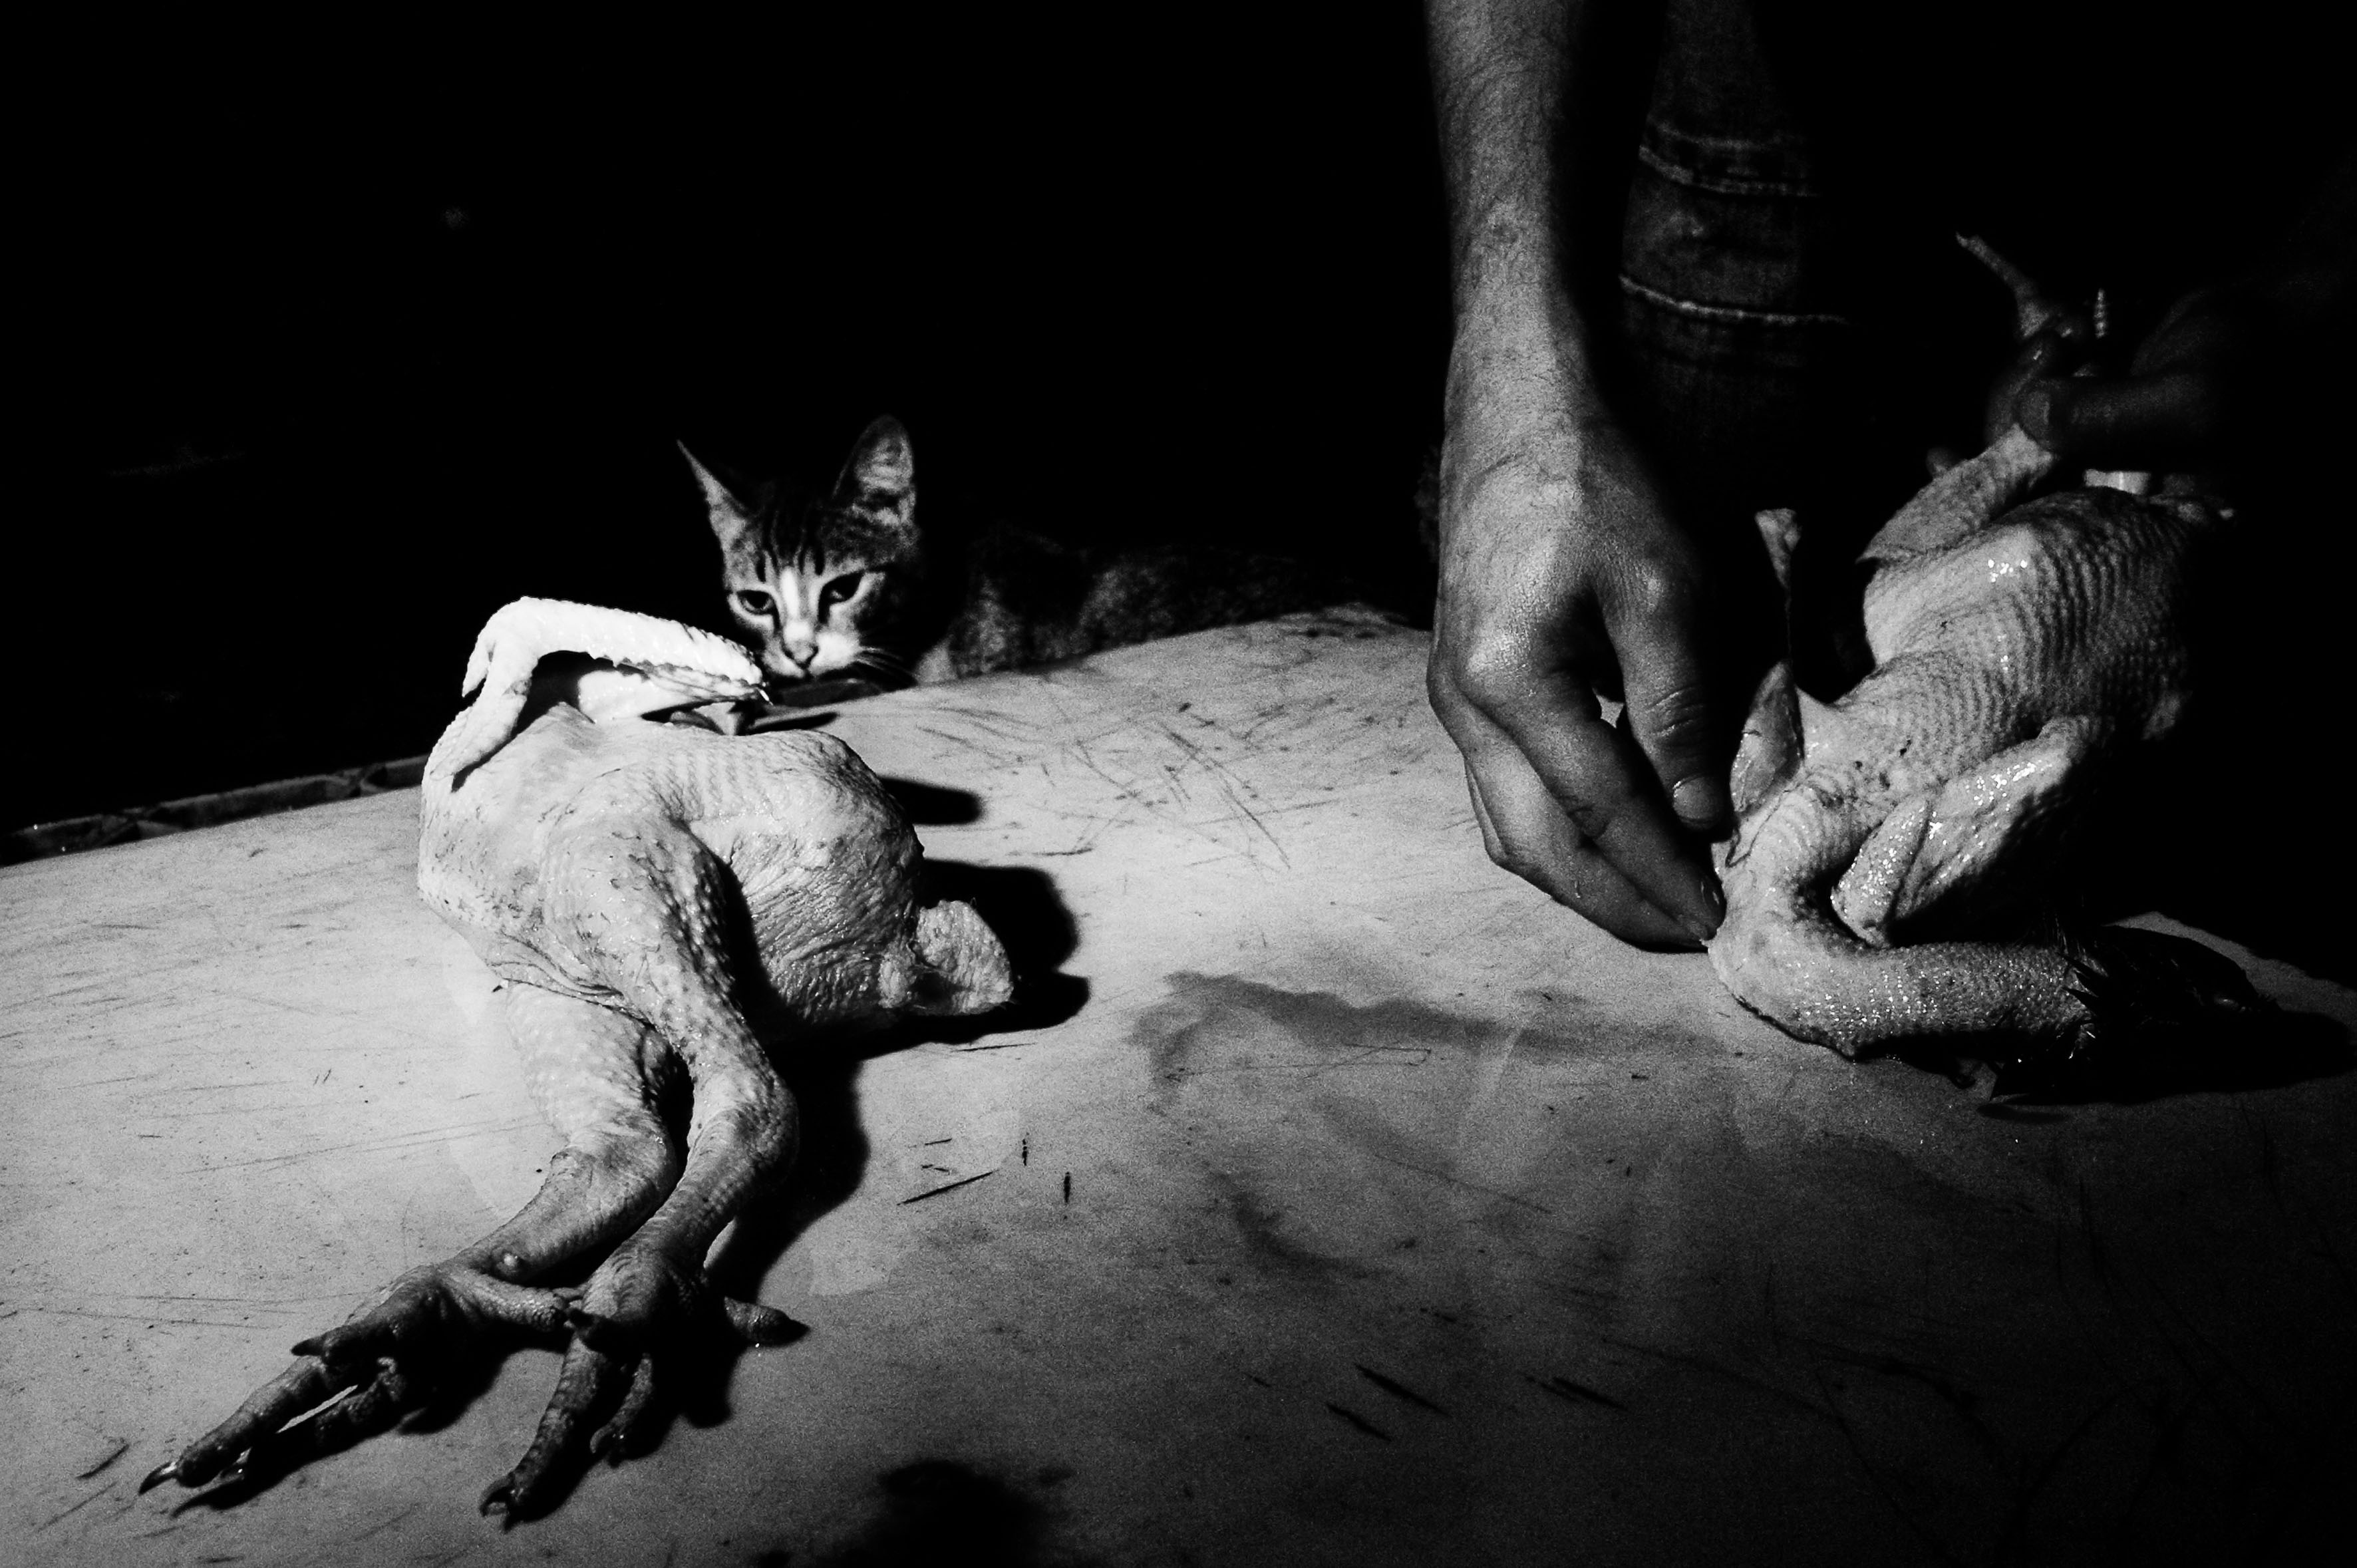 2013: Francesco Anselmi
                              A Moroccan migrant preparing two chickens in Patras, Greece.
                               Eddie Adams Workshop has been one of the most intense moments in my photographic life. While you are there, you are just praying for it to come to an end. There's a kind of magic happening in that barn, and once you are back to normal life, it seems like you've been dreaming.